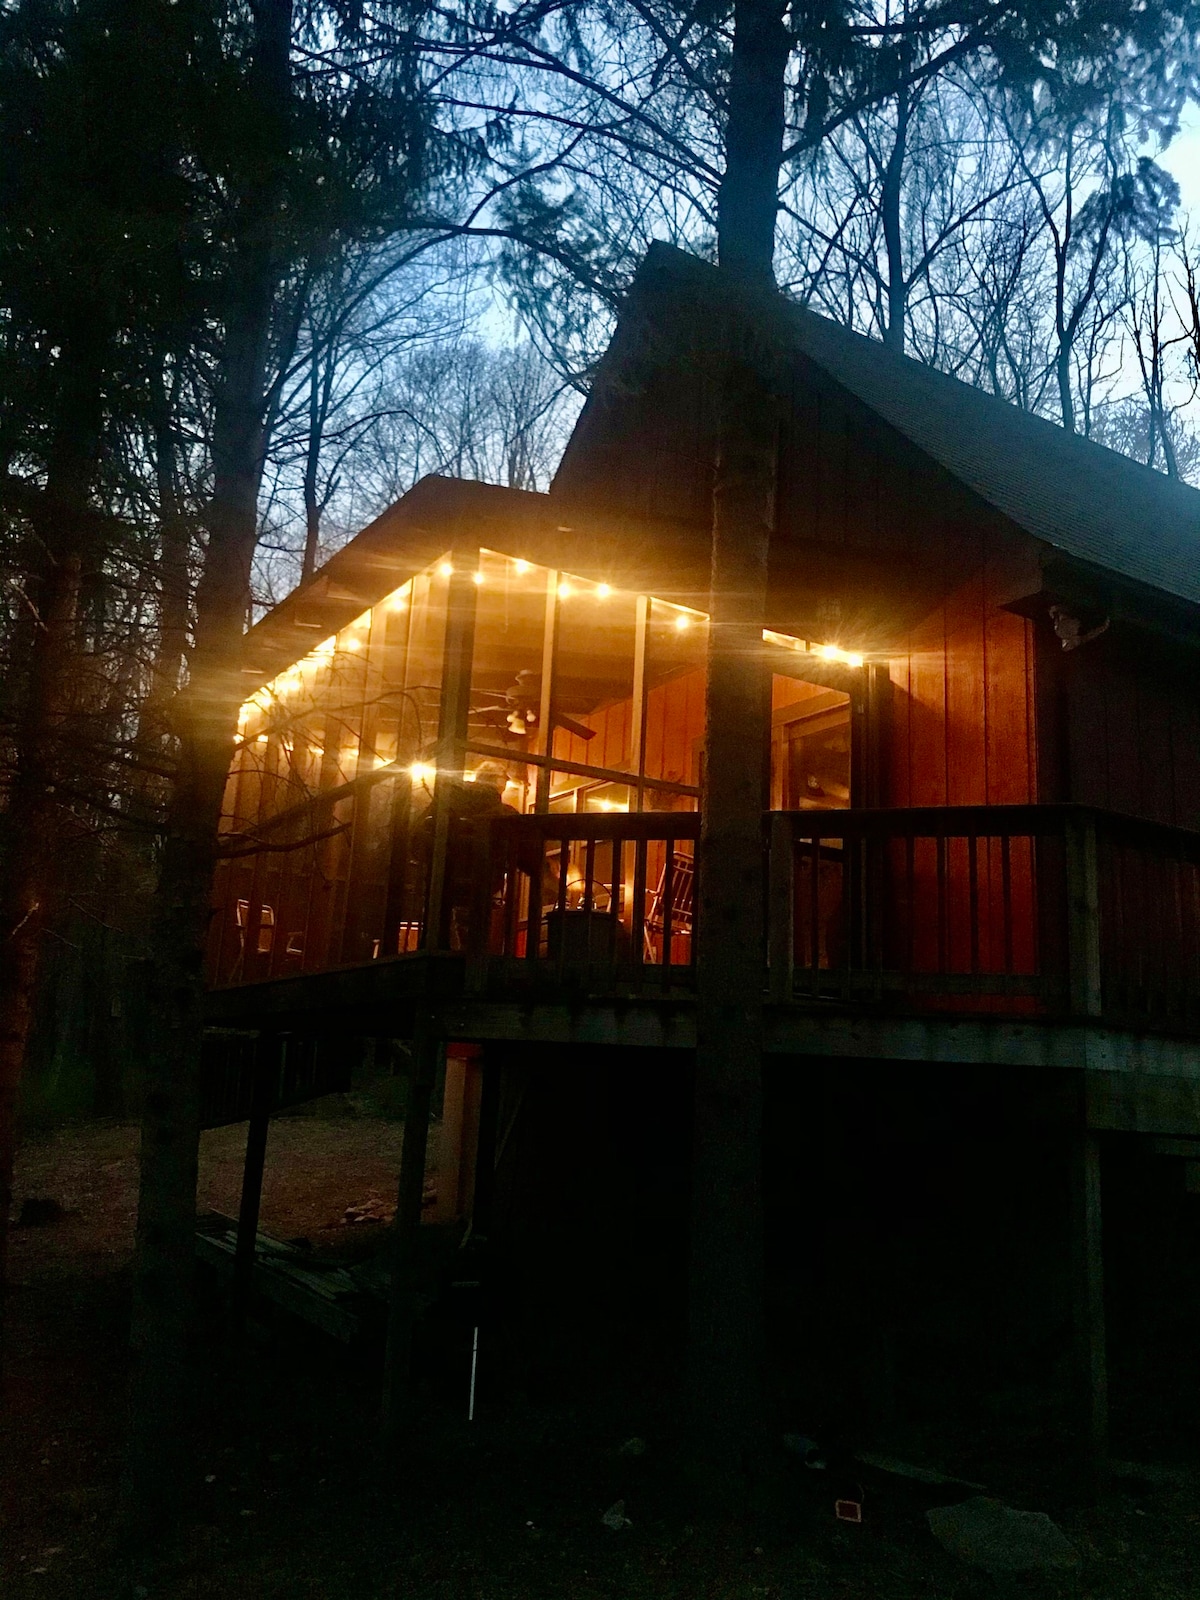 “Little Red Cabin” in the woods